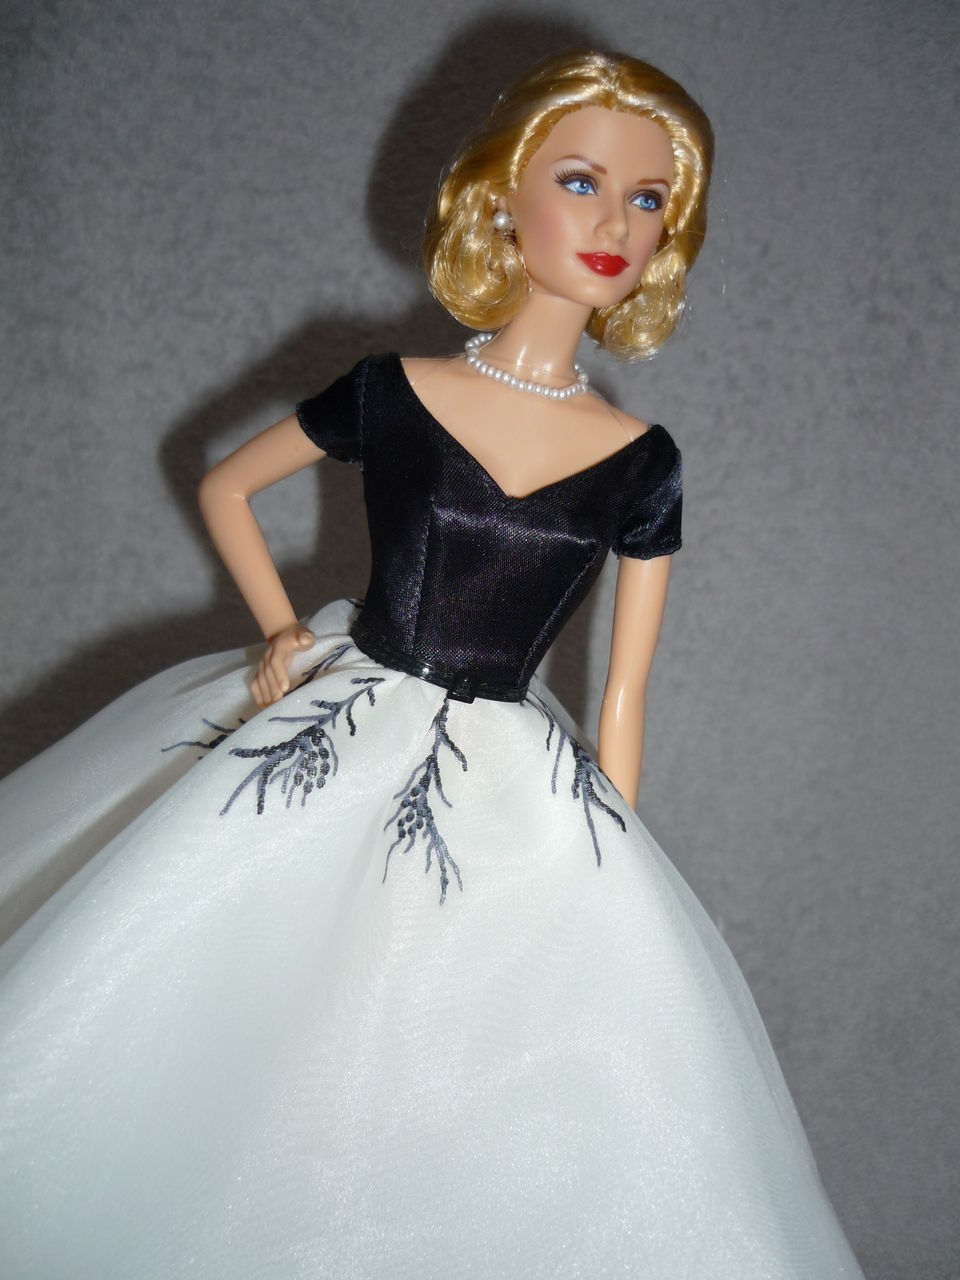 Barbie バービー Collector To Catch A Thief Grace Kelly Doll 人形